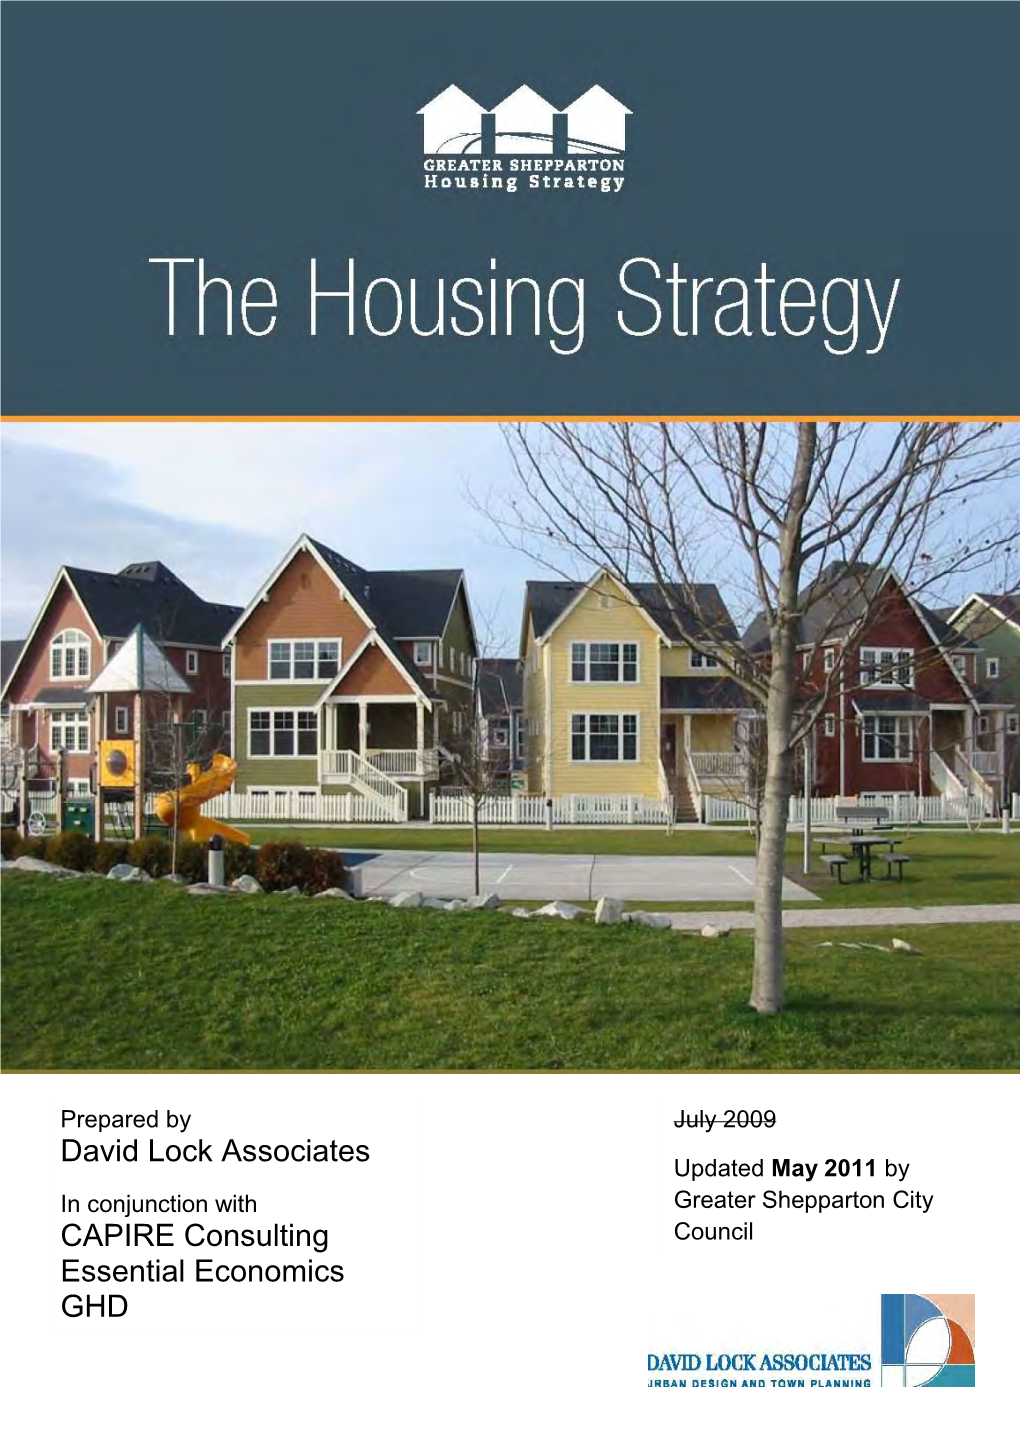 Greater Shepparton Housing Strategy 1 1.2 Developing the Housing Strategy 1 1.3 Key Policy Directions 2 1.4 Strategy Outcomes 3 1.5 Structure of Report 3